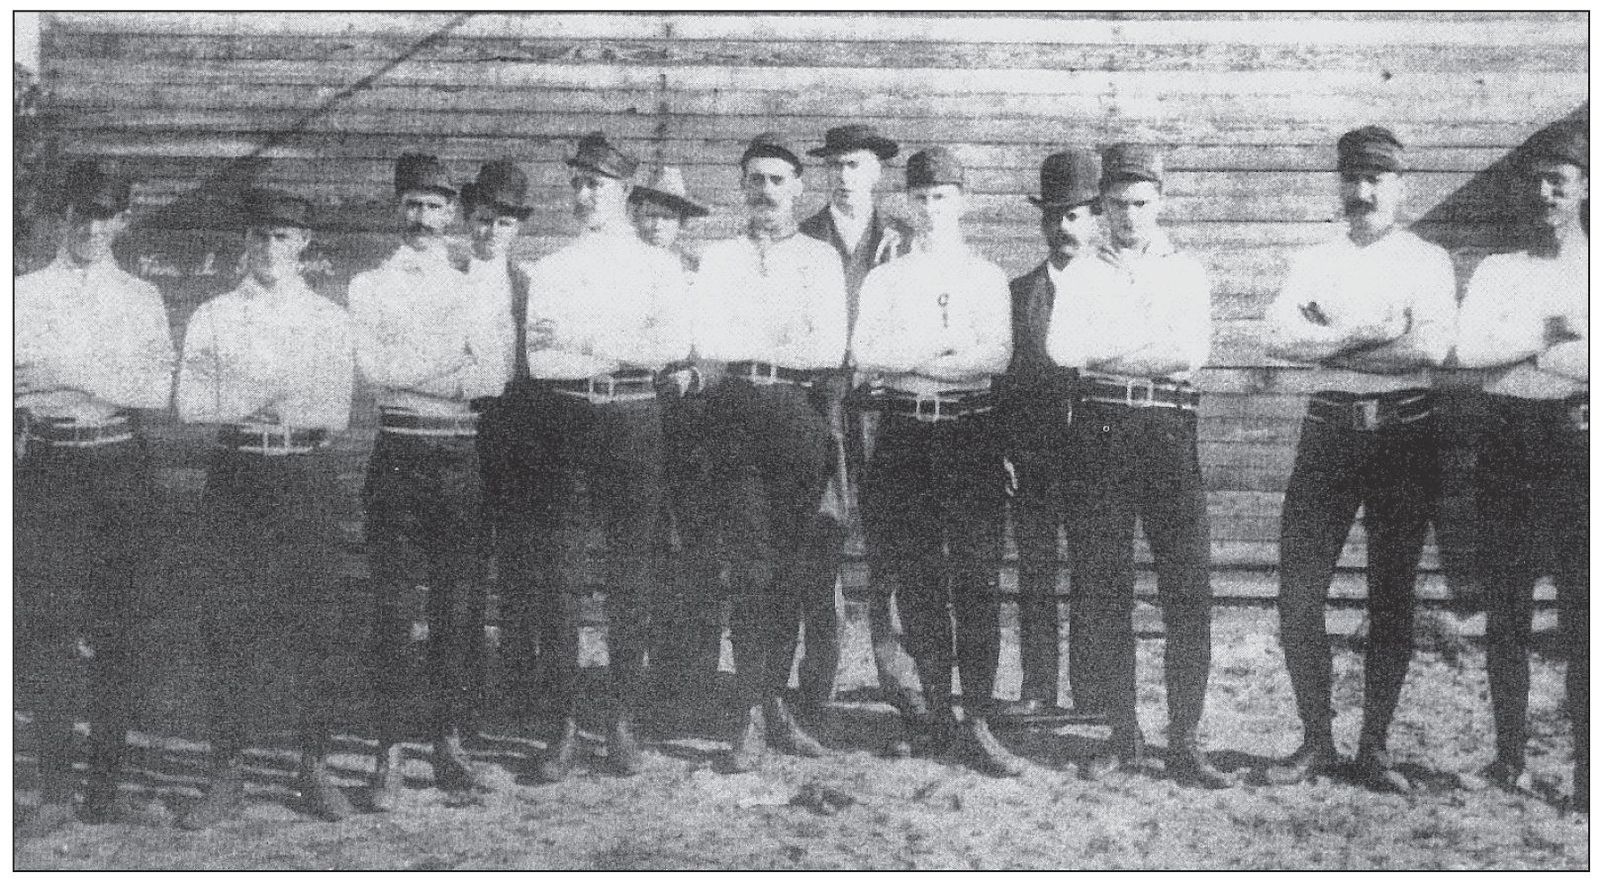 Members of the Tampa baseball club display their uniforms from the 1890s Tampa - photo 15